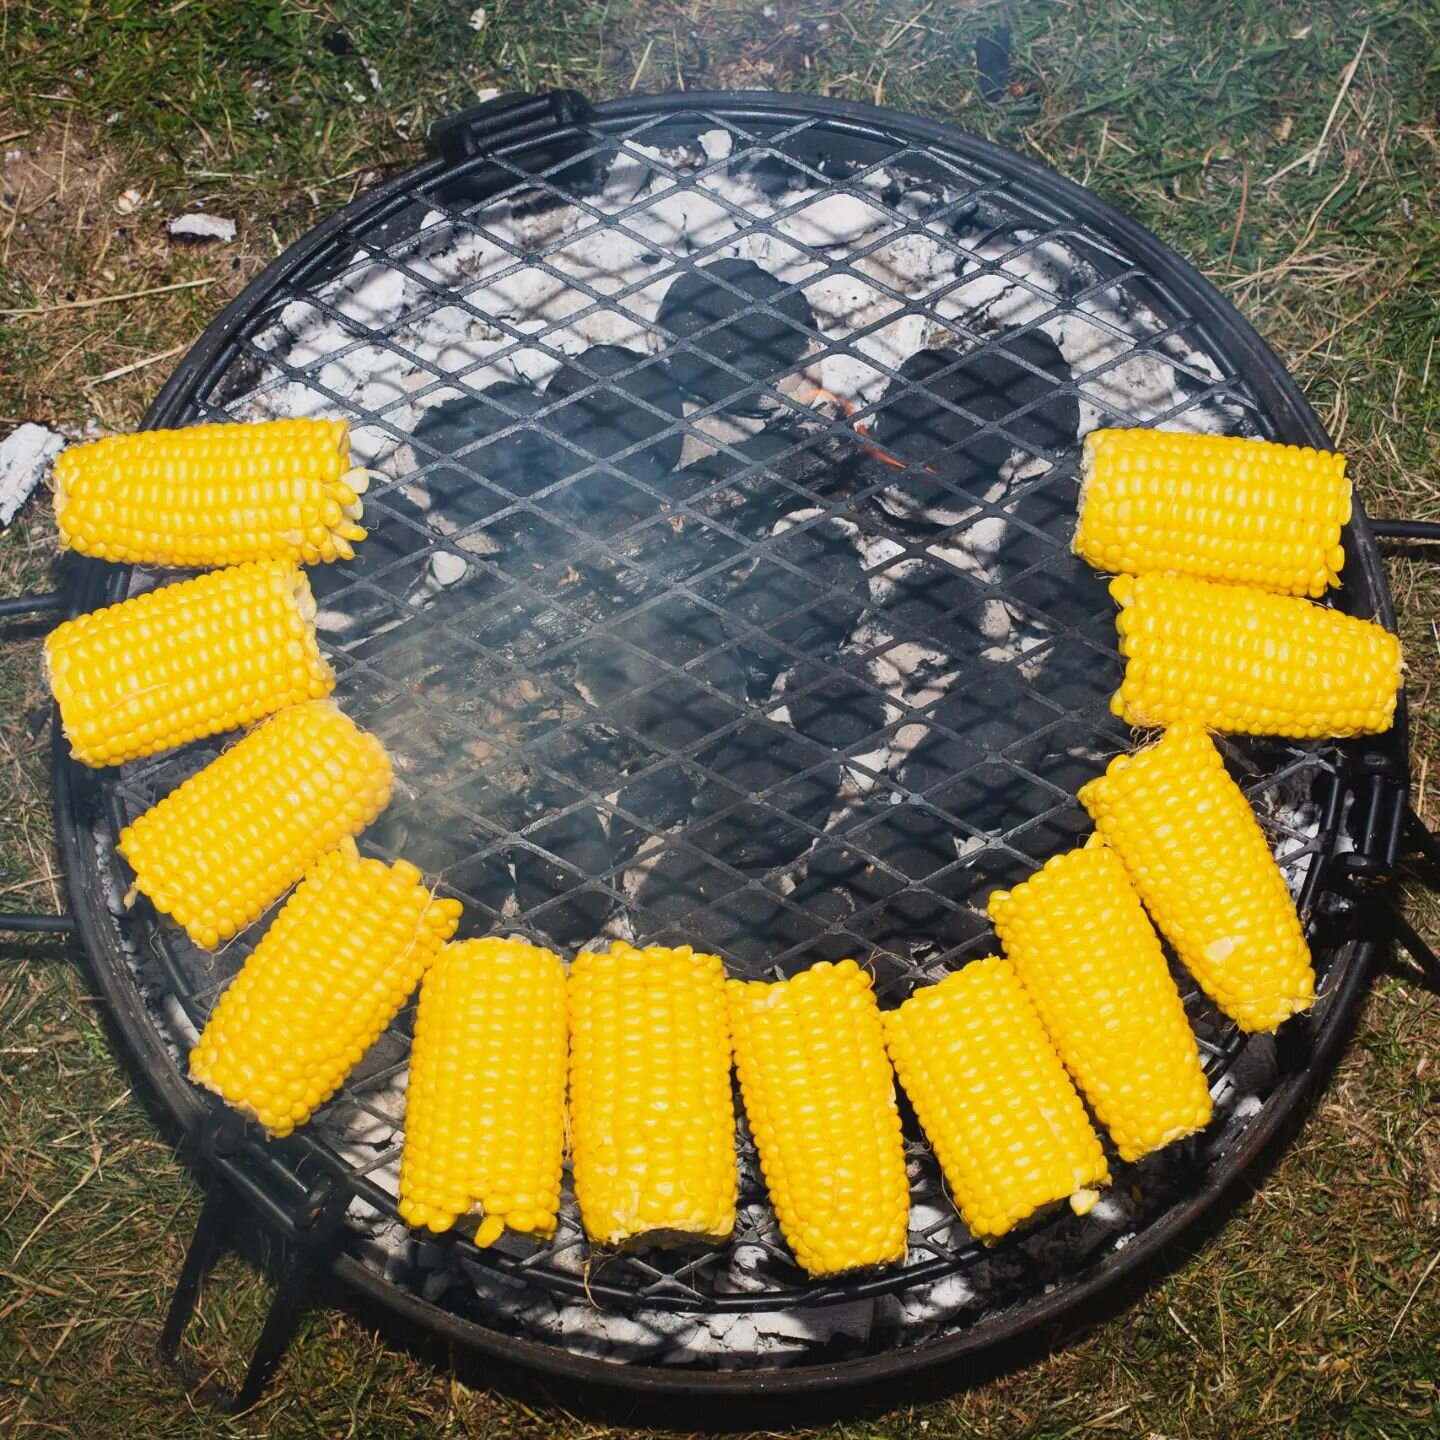 One happy BBQ 
(even if it has lost its eyes)

#bbq #summertime #campinglife